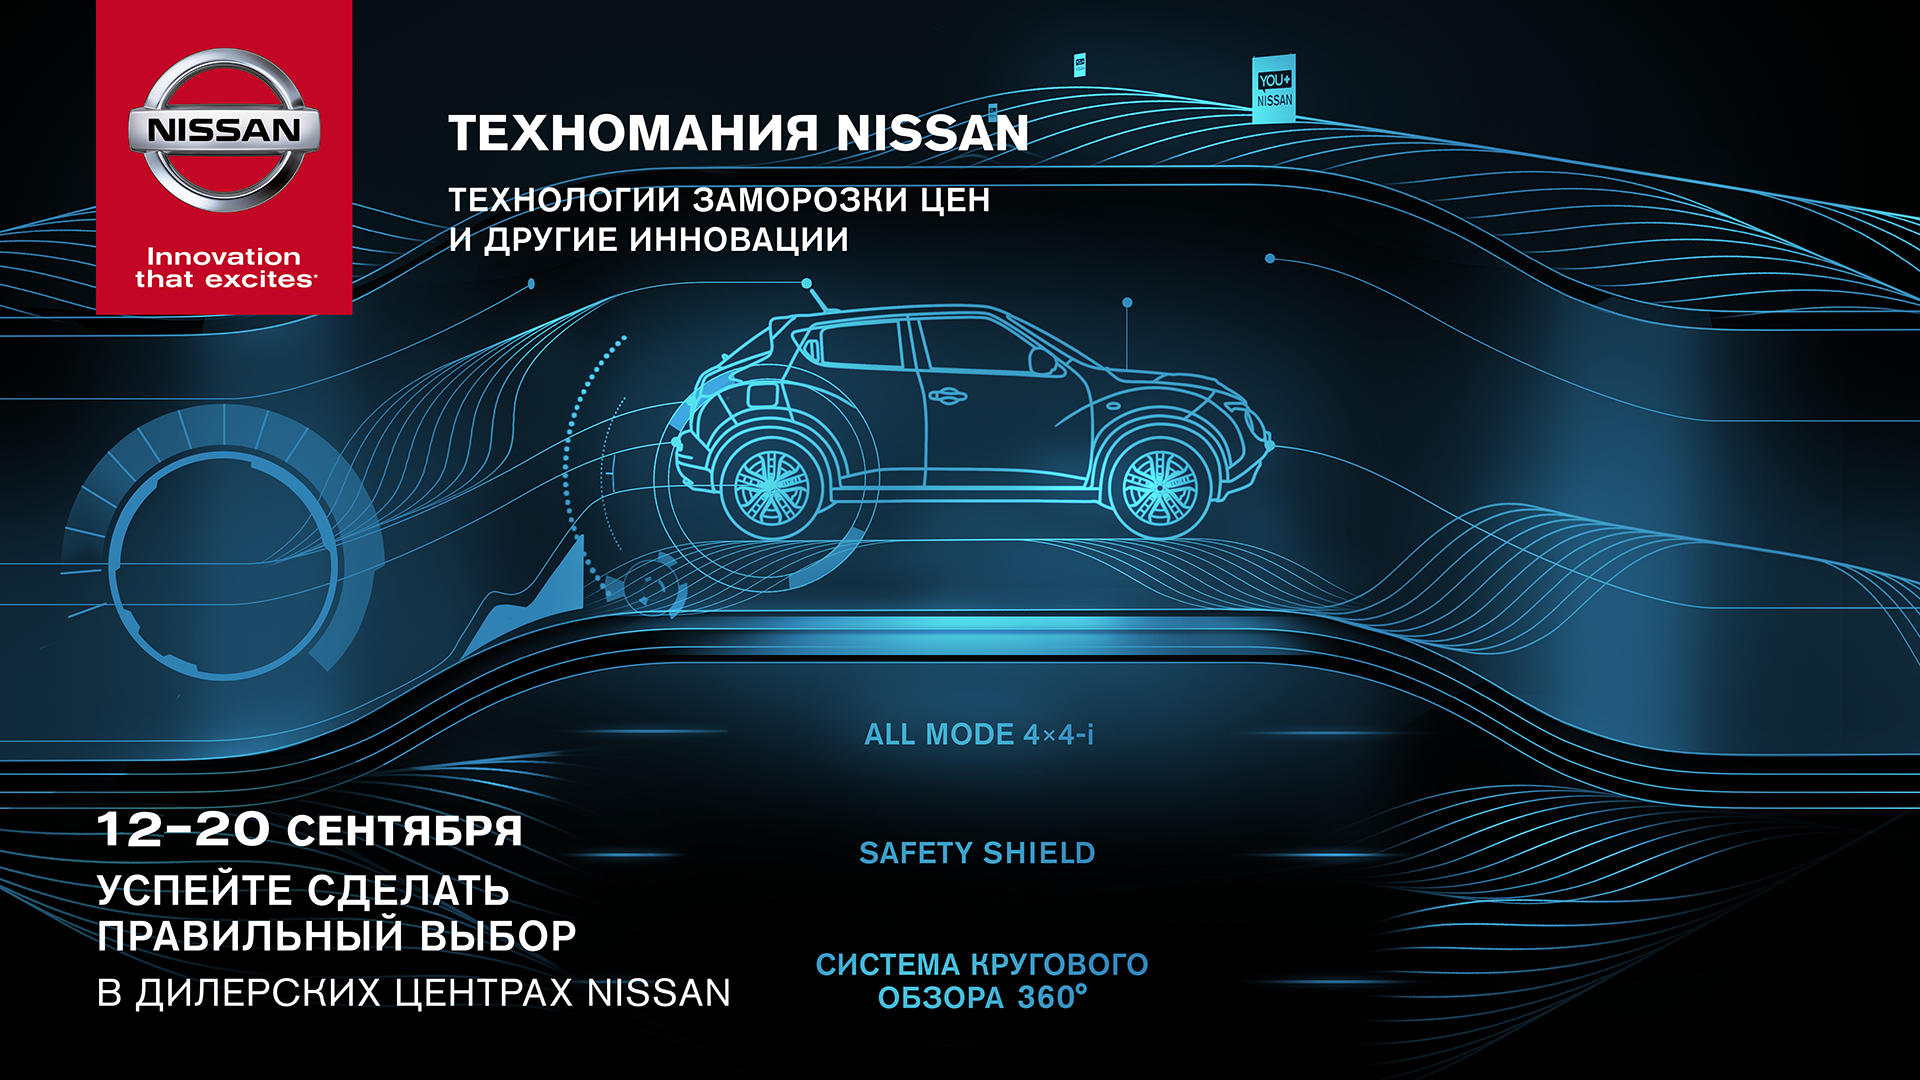 Technomania_Web-banner_1920x1080_Moscow.png